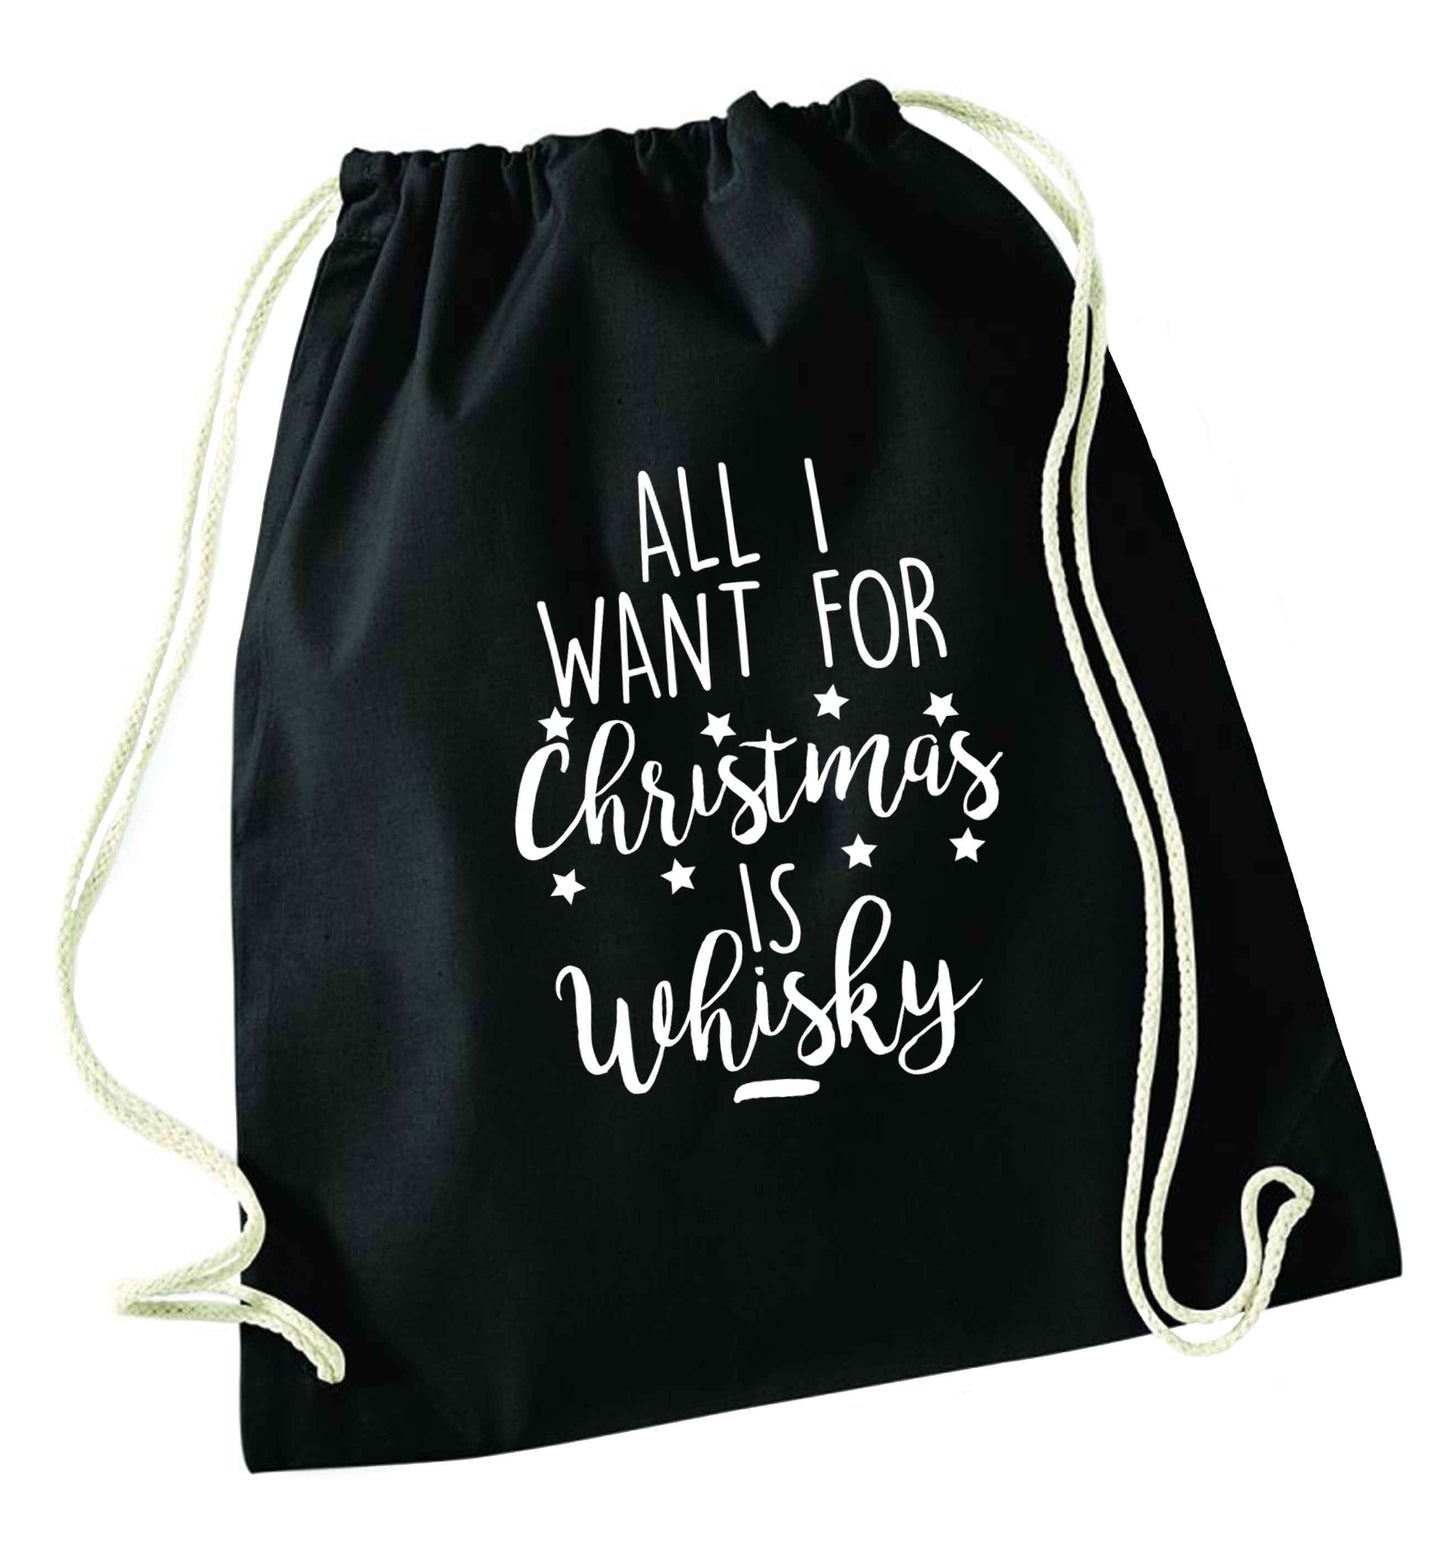 All I want for Christmas is whisky black drawstring bag